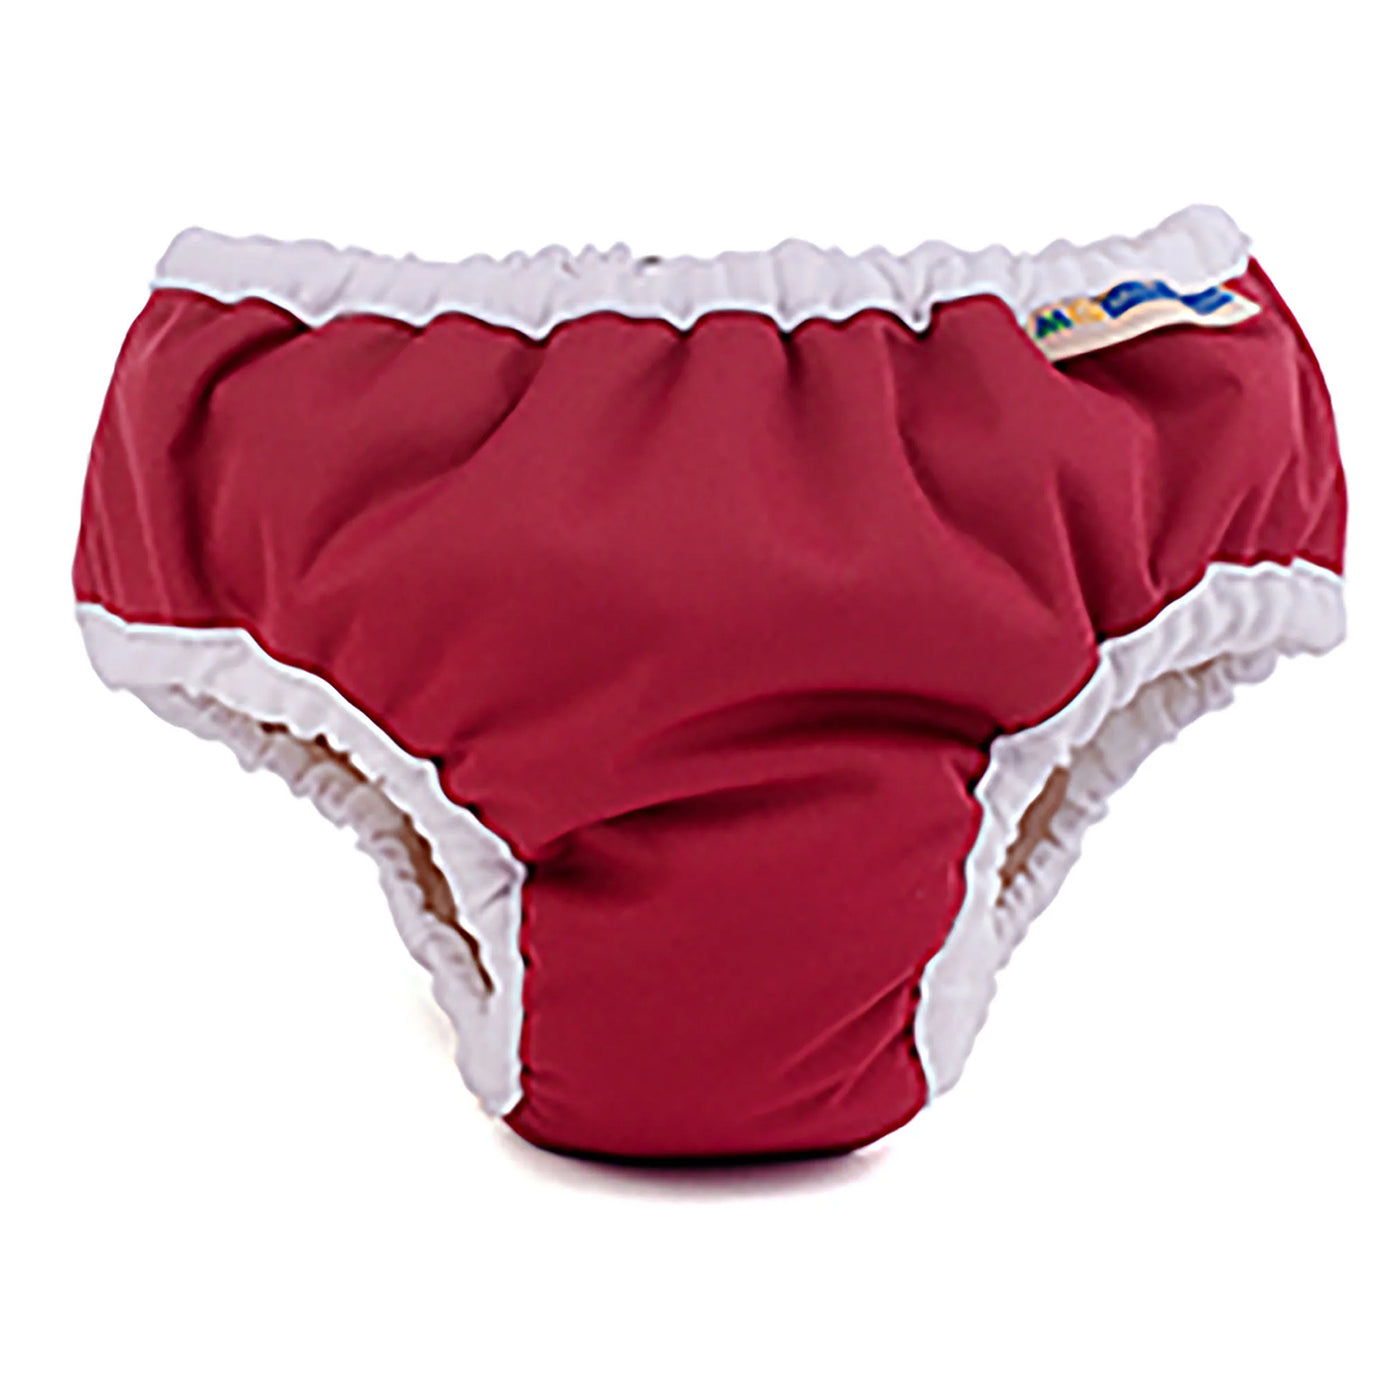 Mother-ease big kid waterproof cotton training pant cranberry